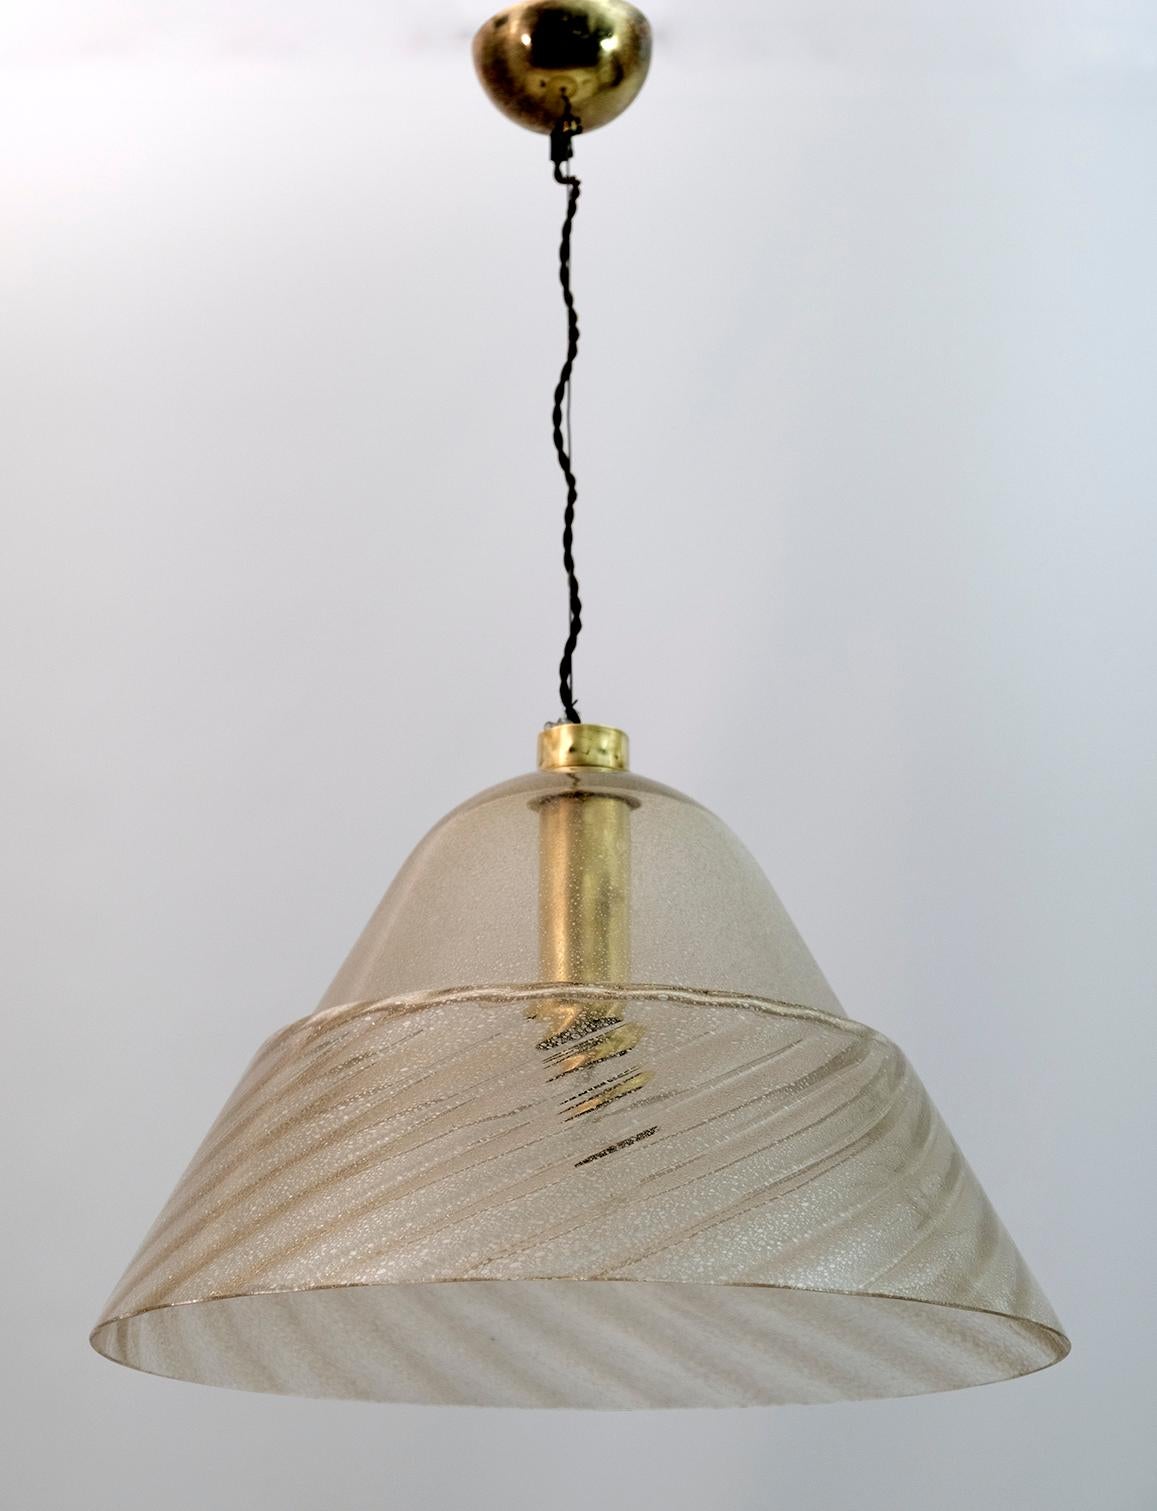 Suspension lamp in blown Murano glass with air bubbles, composed of two parts, underlying spiral and smooth upper part.